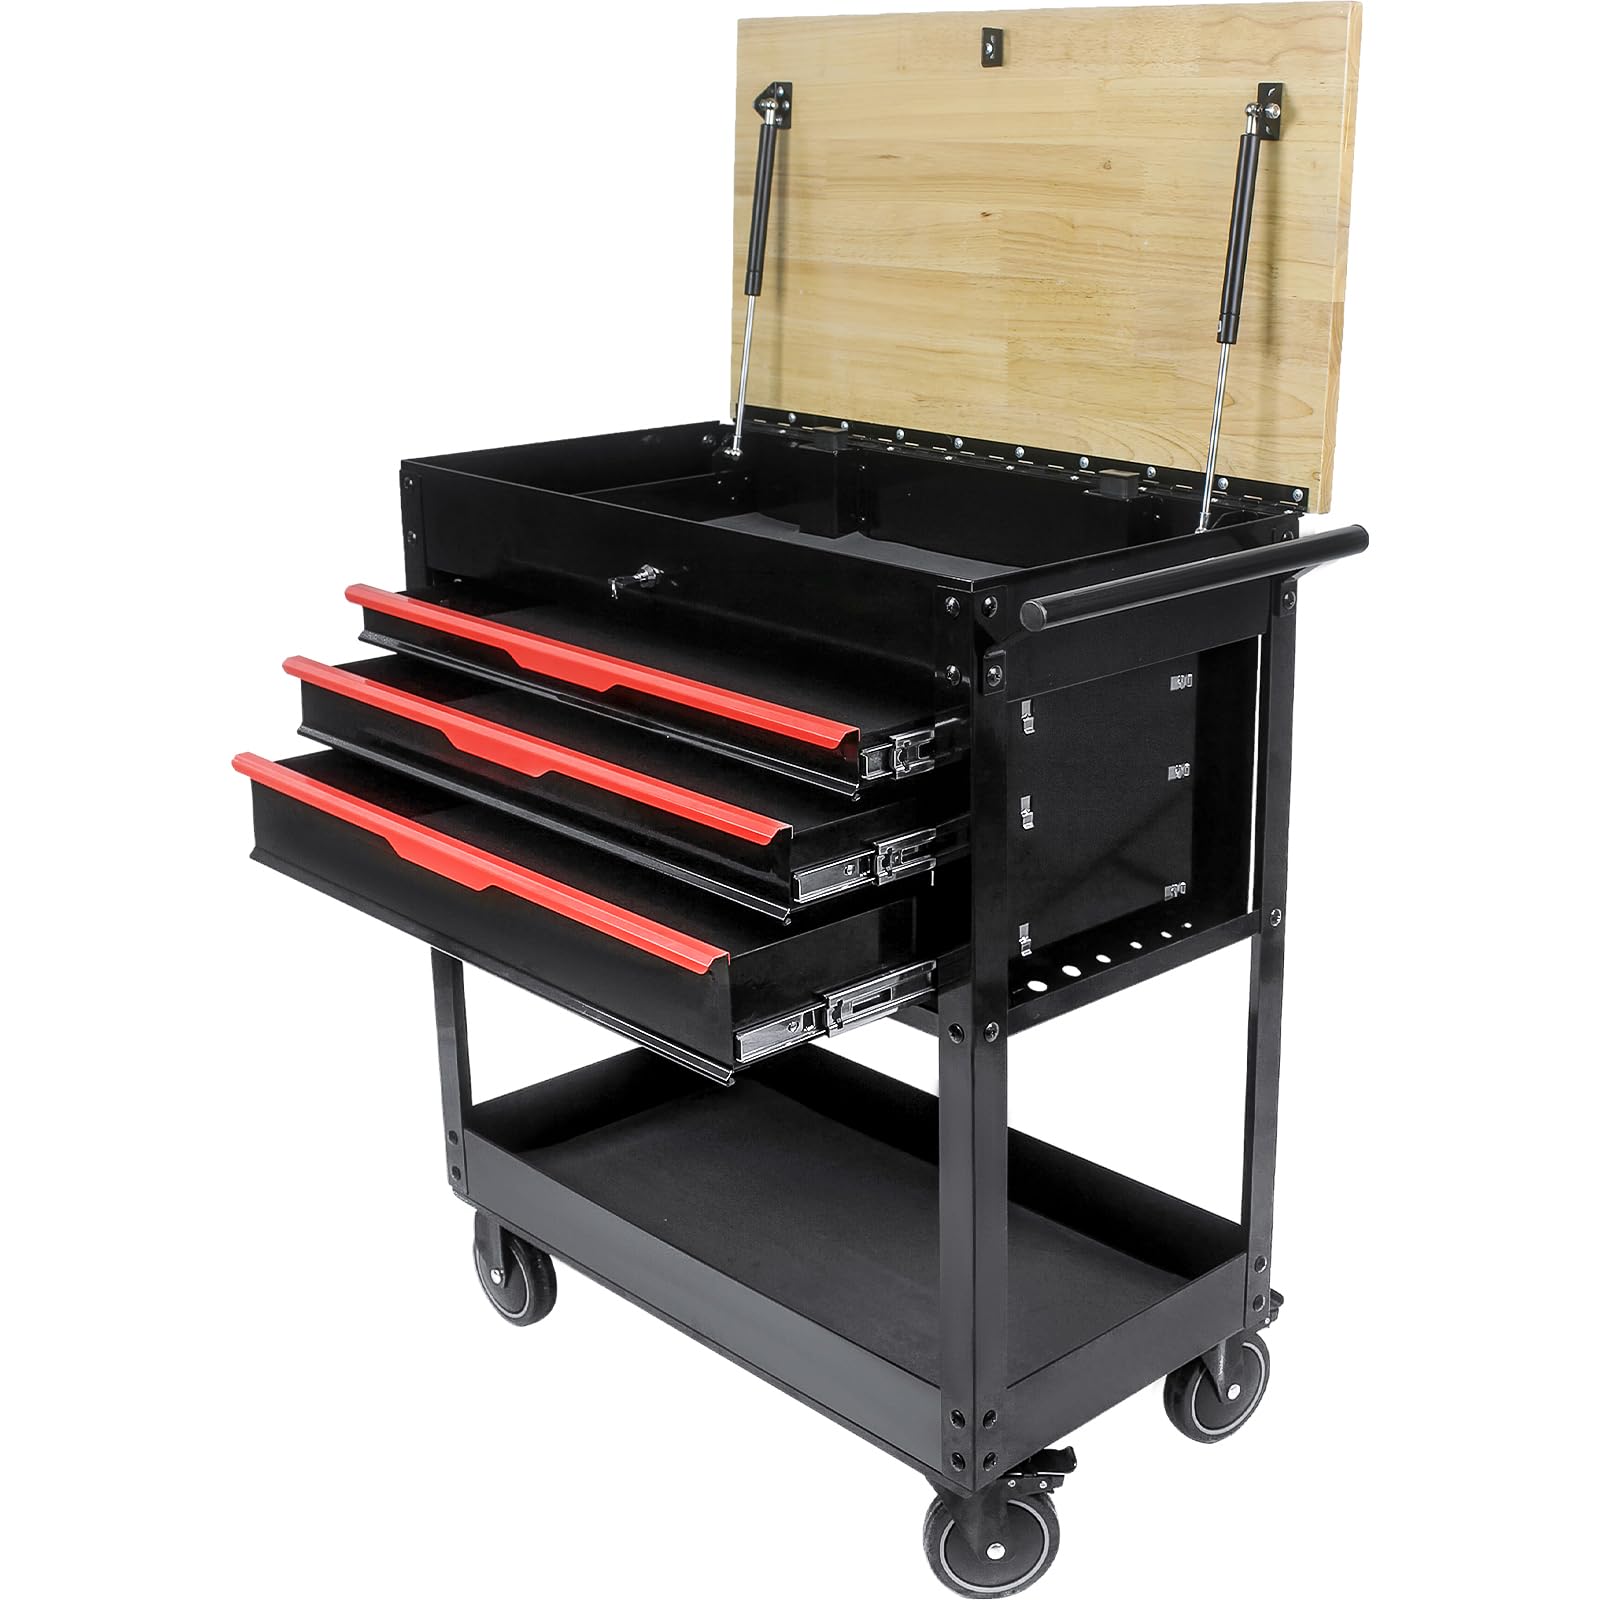 3-Drawer Rolling Tool Chest Cabinet, 38-Inch Tool Box, Multifunction Tool Cart with Wheels and Wooden Top, Drawer Liner, Mobile Toolbox for Workshop Mechanics Garage (3 DRAWERS- BLACK AND RED)